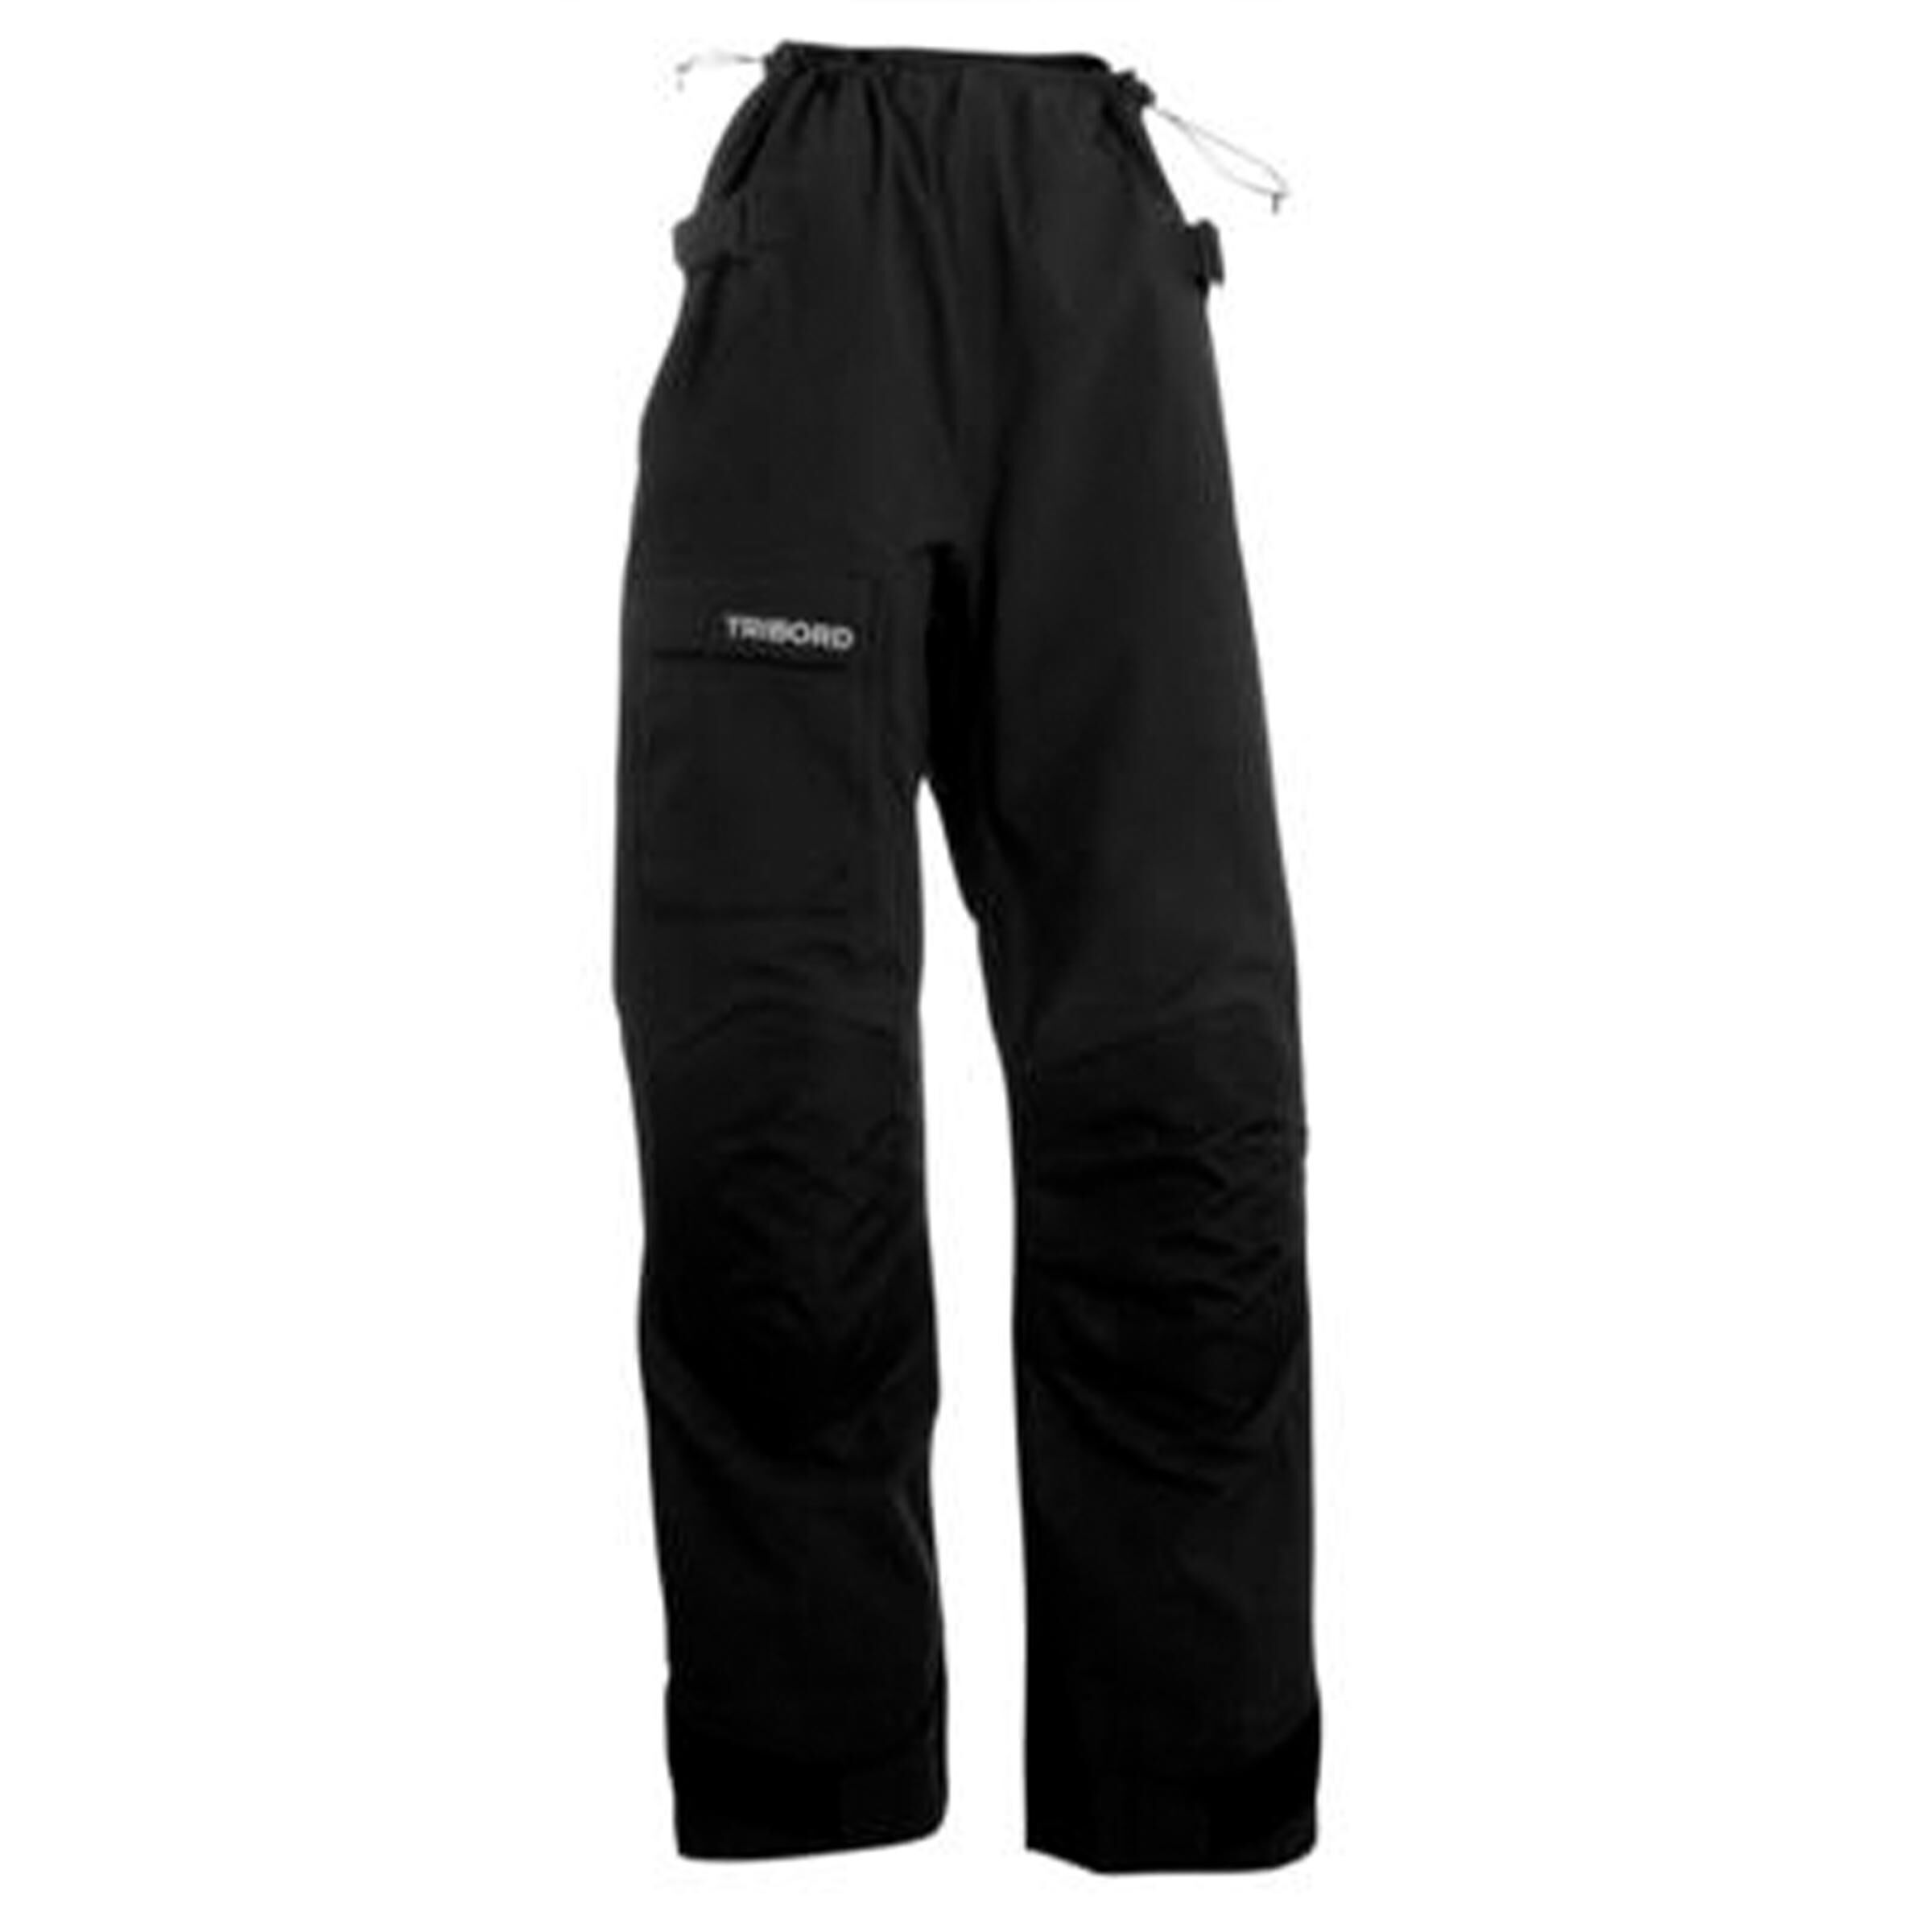 TRIBORD Women's OFFSHORE 900 waterproof overtrousers - Black